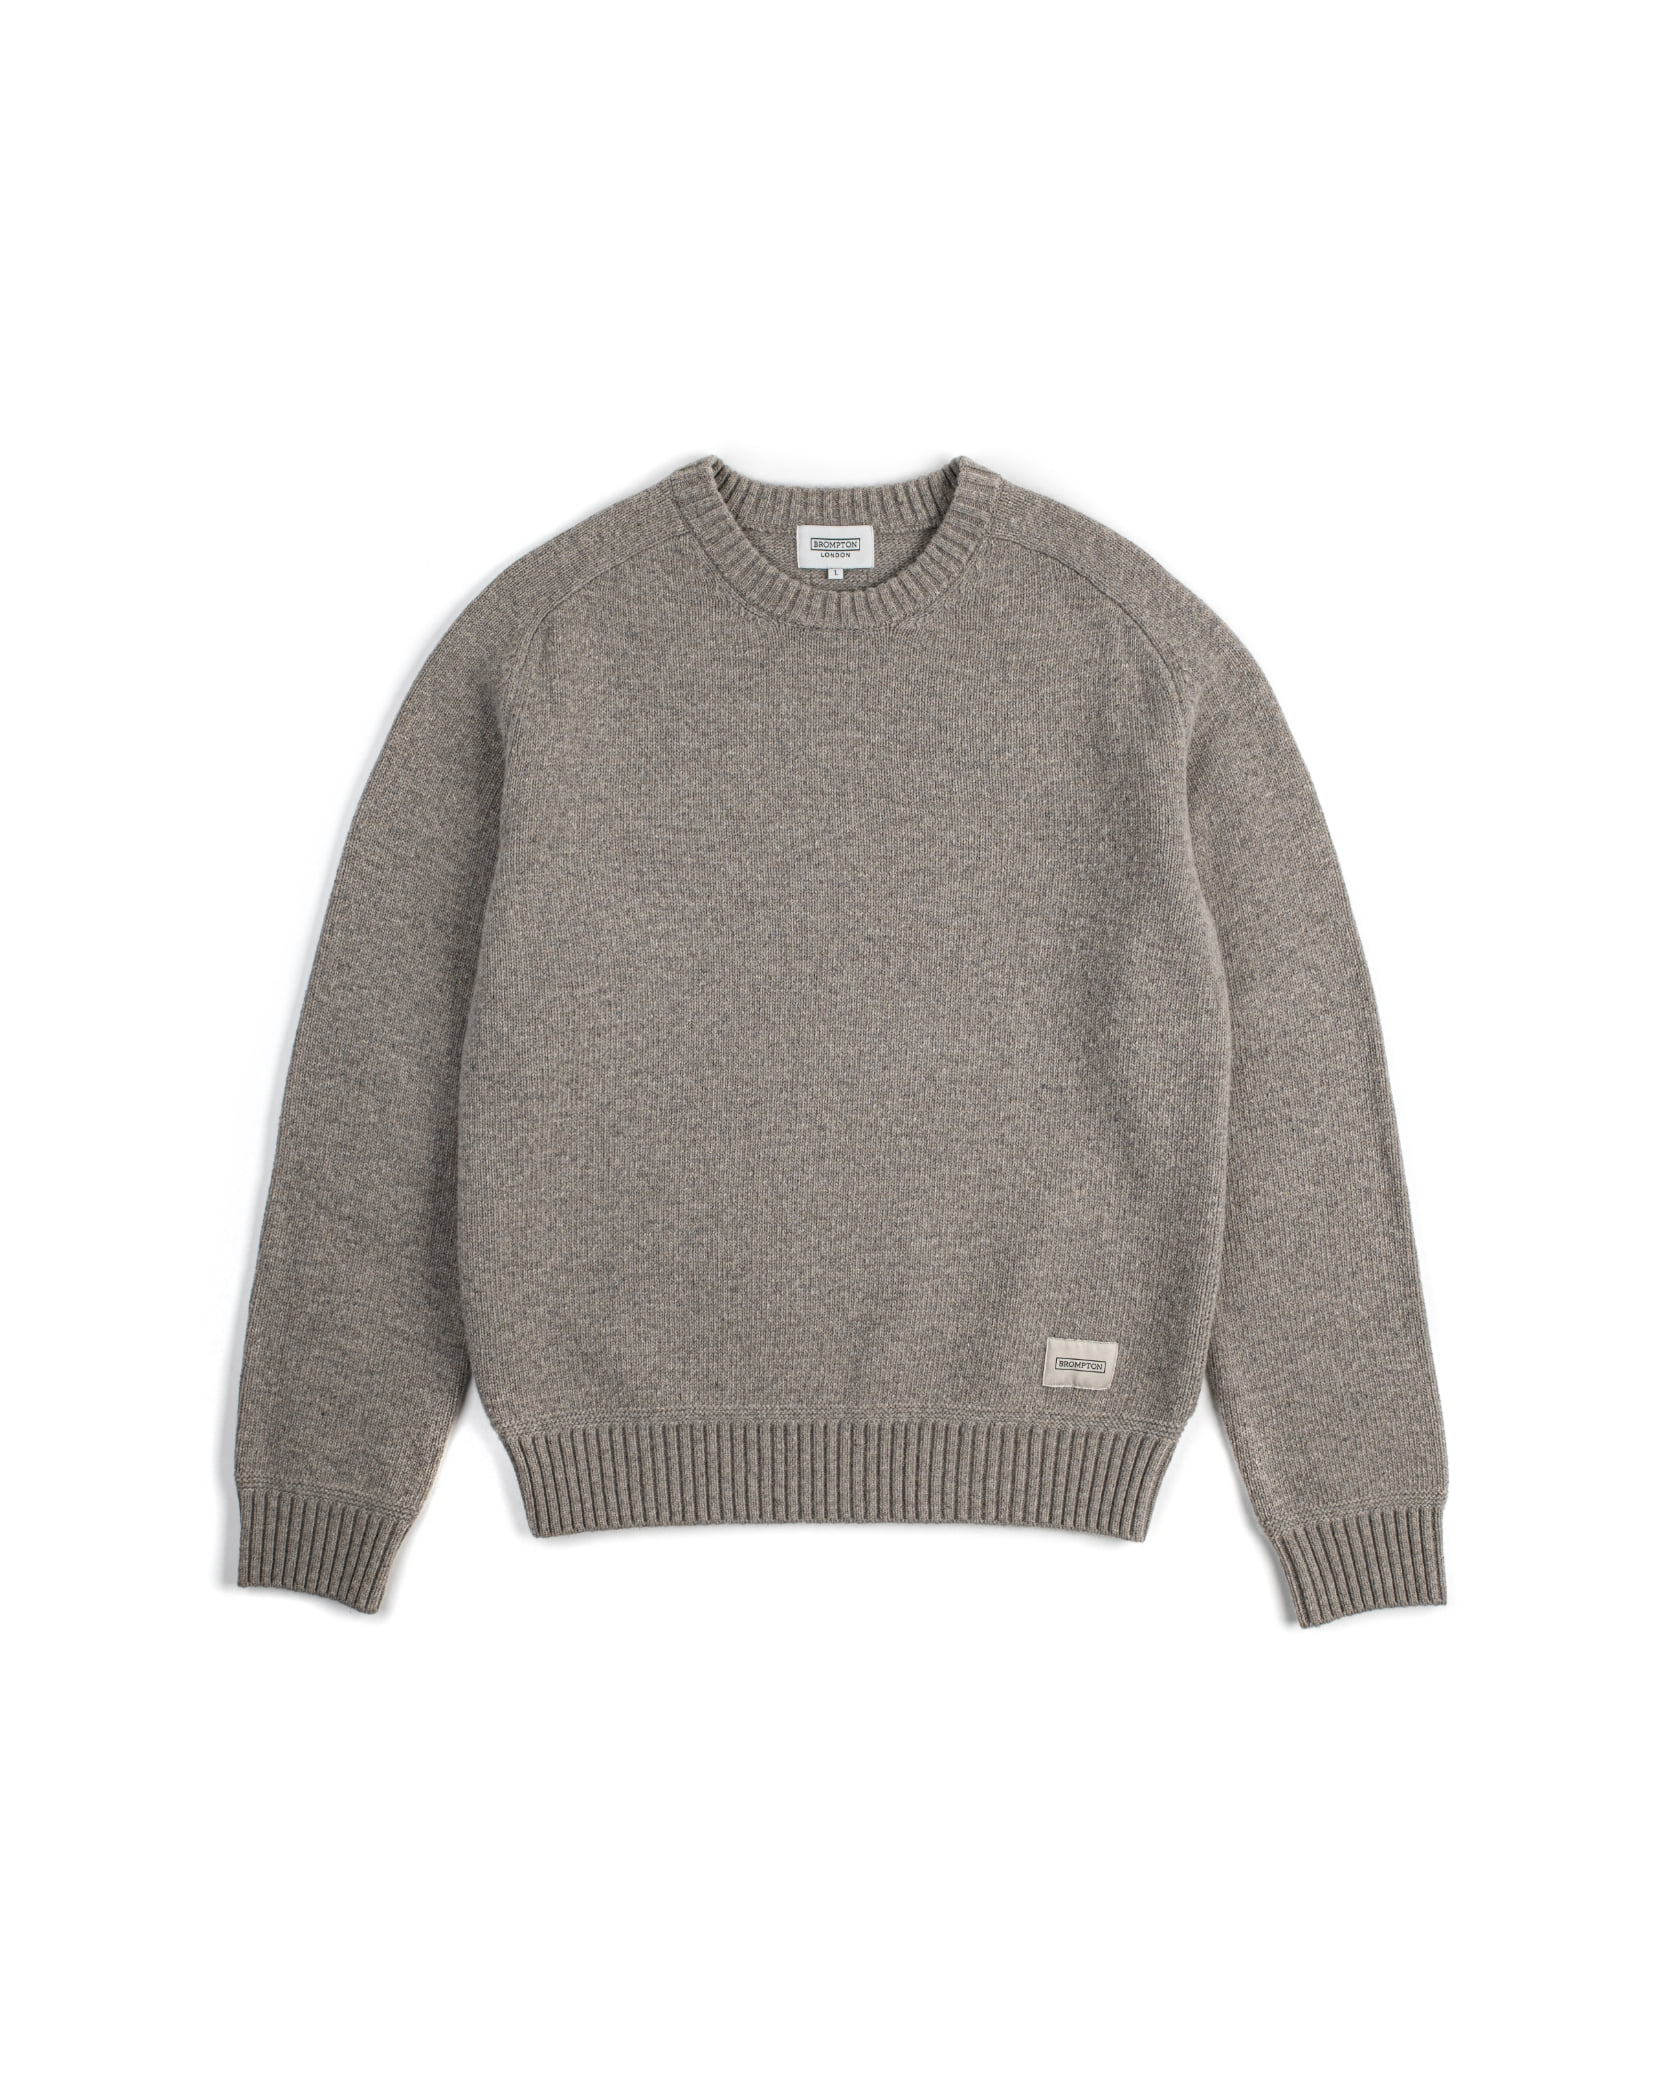 [BEST] WOOL BLENDED ELBOW PATCH ROUND SWEATER - OATMEAL